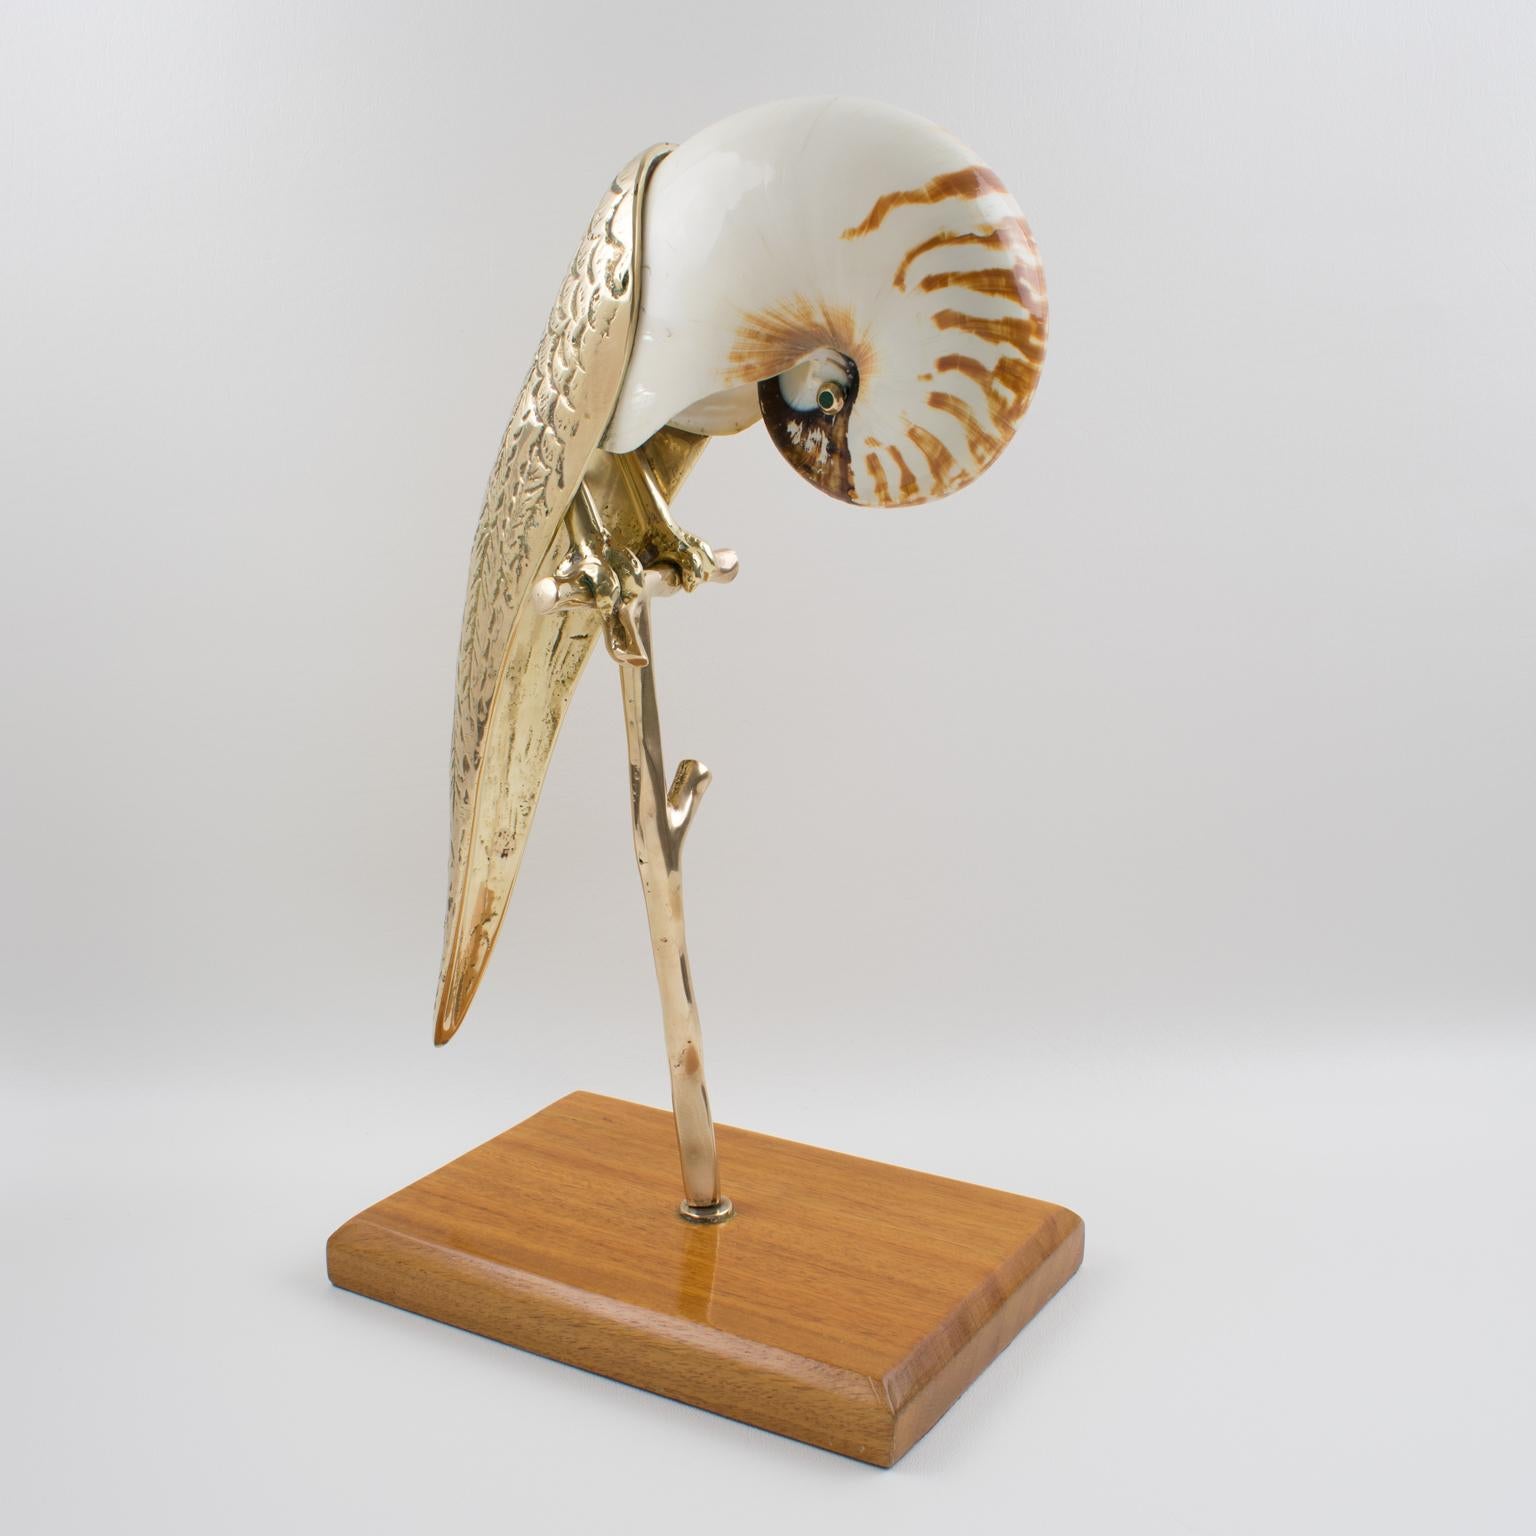 Beautiful sculpture by Maitland-Smith, featuring a parrot bird. The bird is made of polished solid brass with refining detailing and nautilus seashell. The bird also has a precious Malachite stone eye on each side. The bird stands on a solid brass